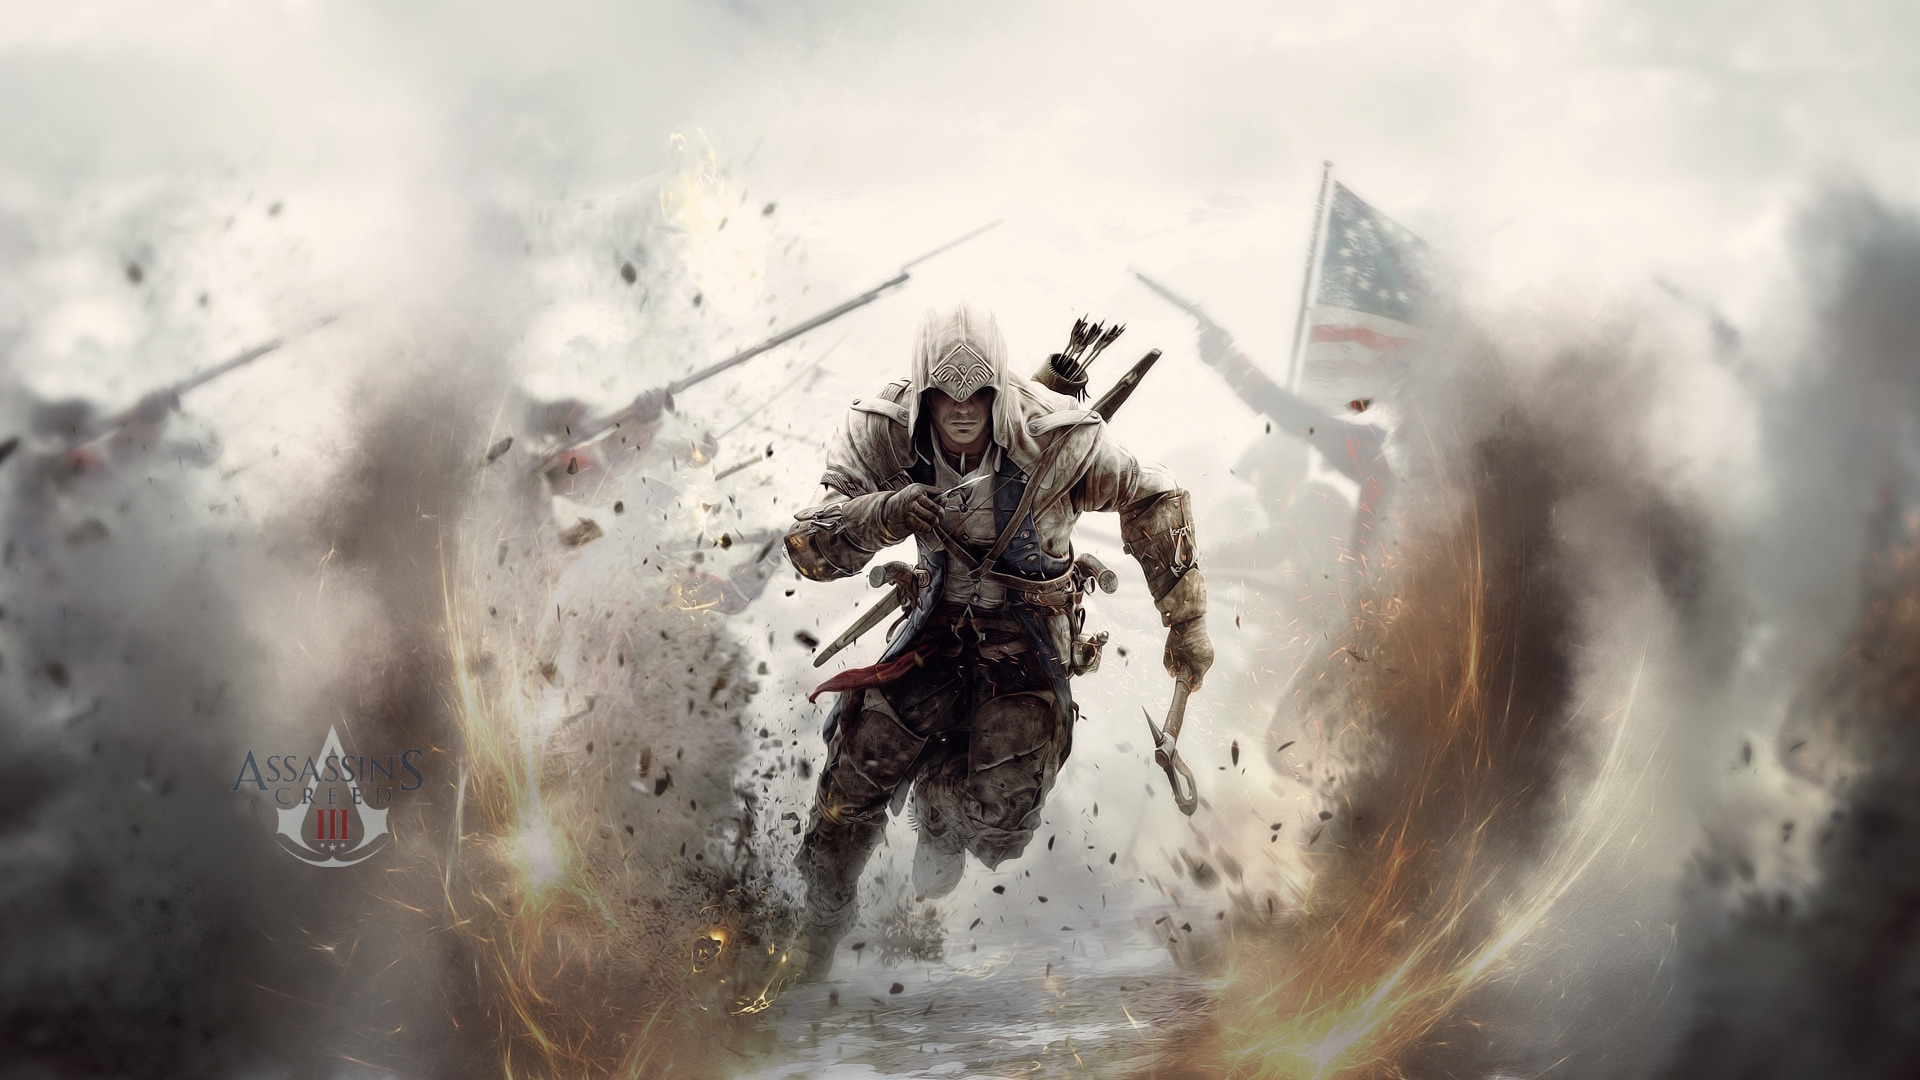 Assassins Creed 3 Game for 1920 x 1080 HDTV 1080p resolution